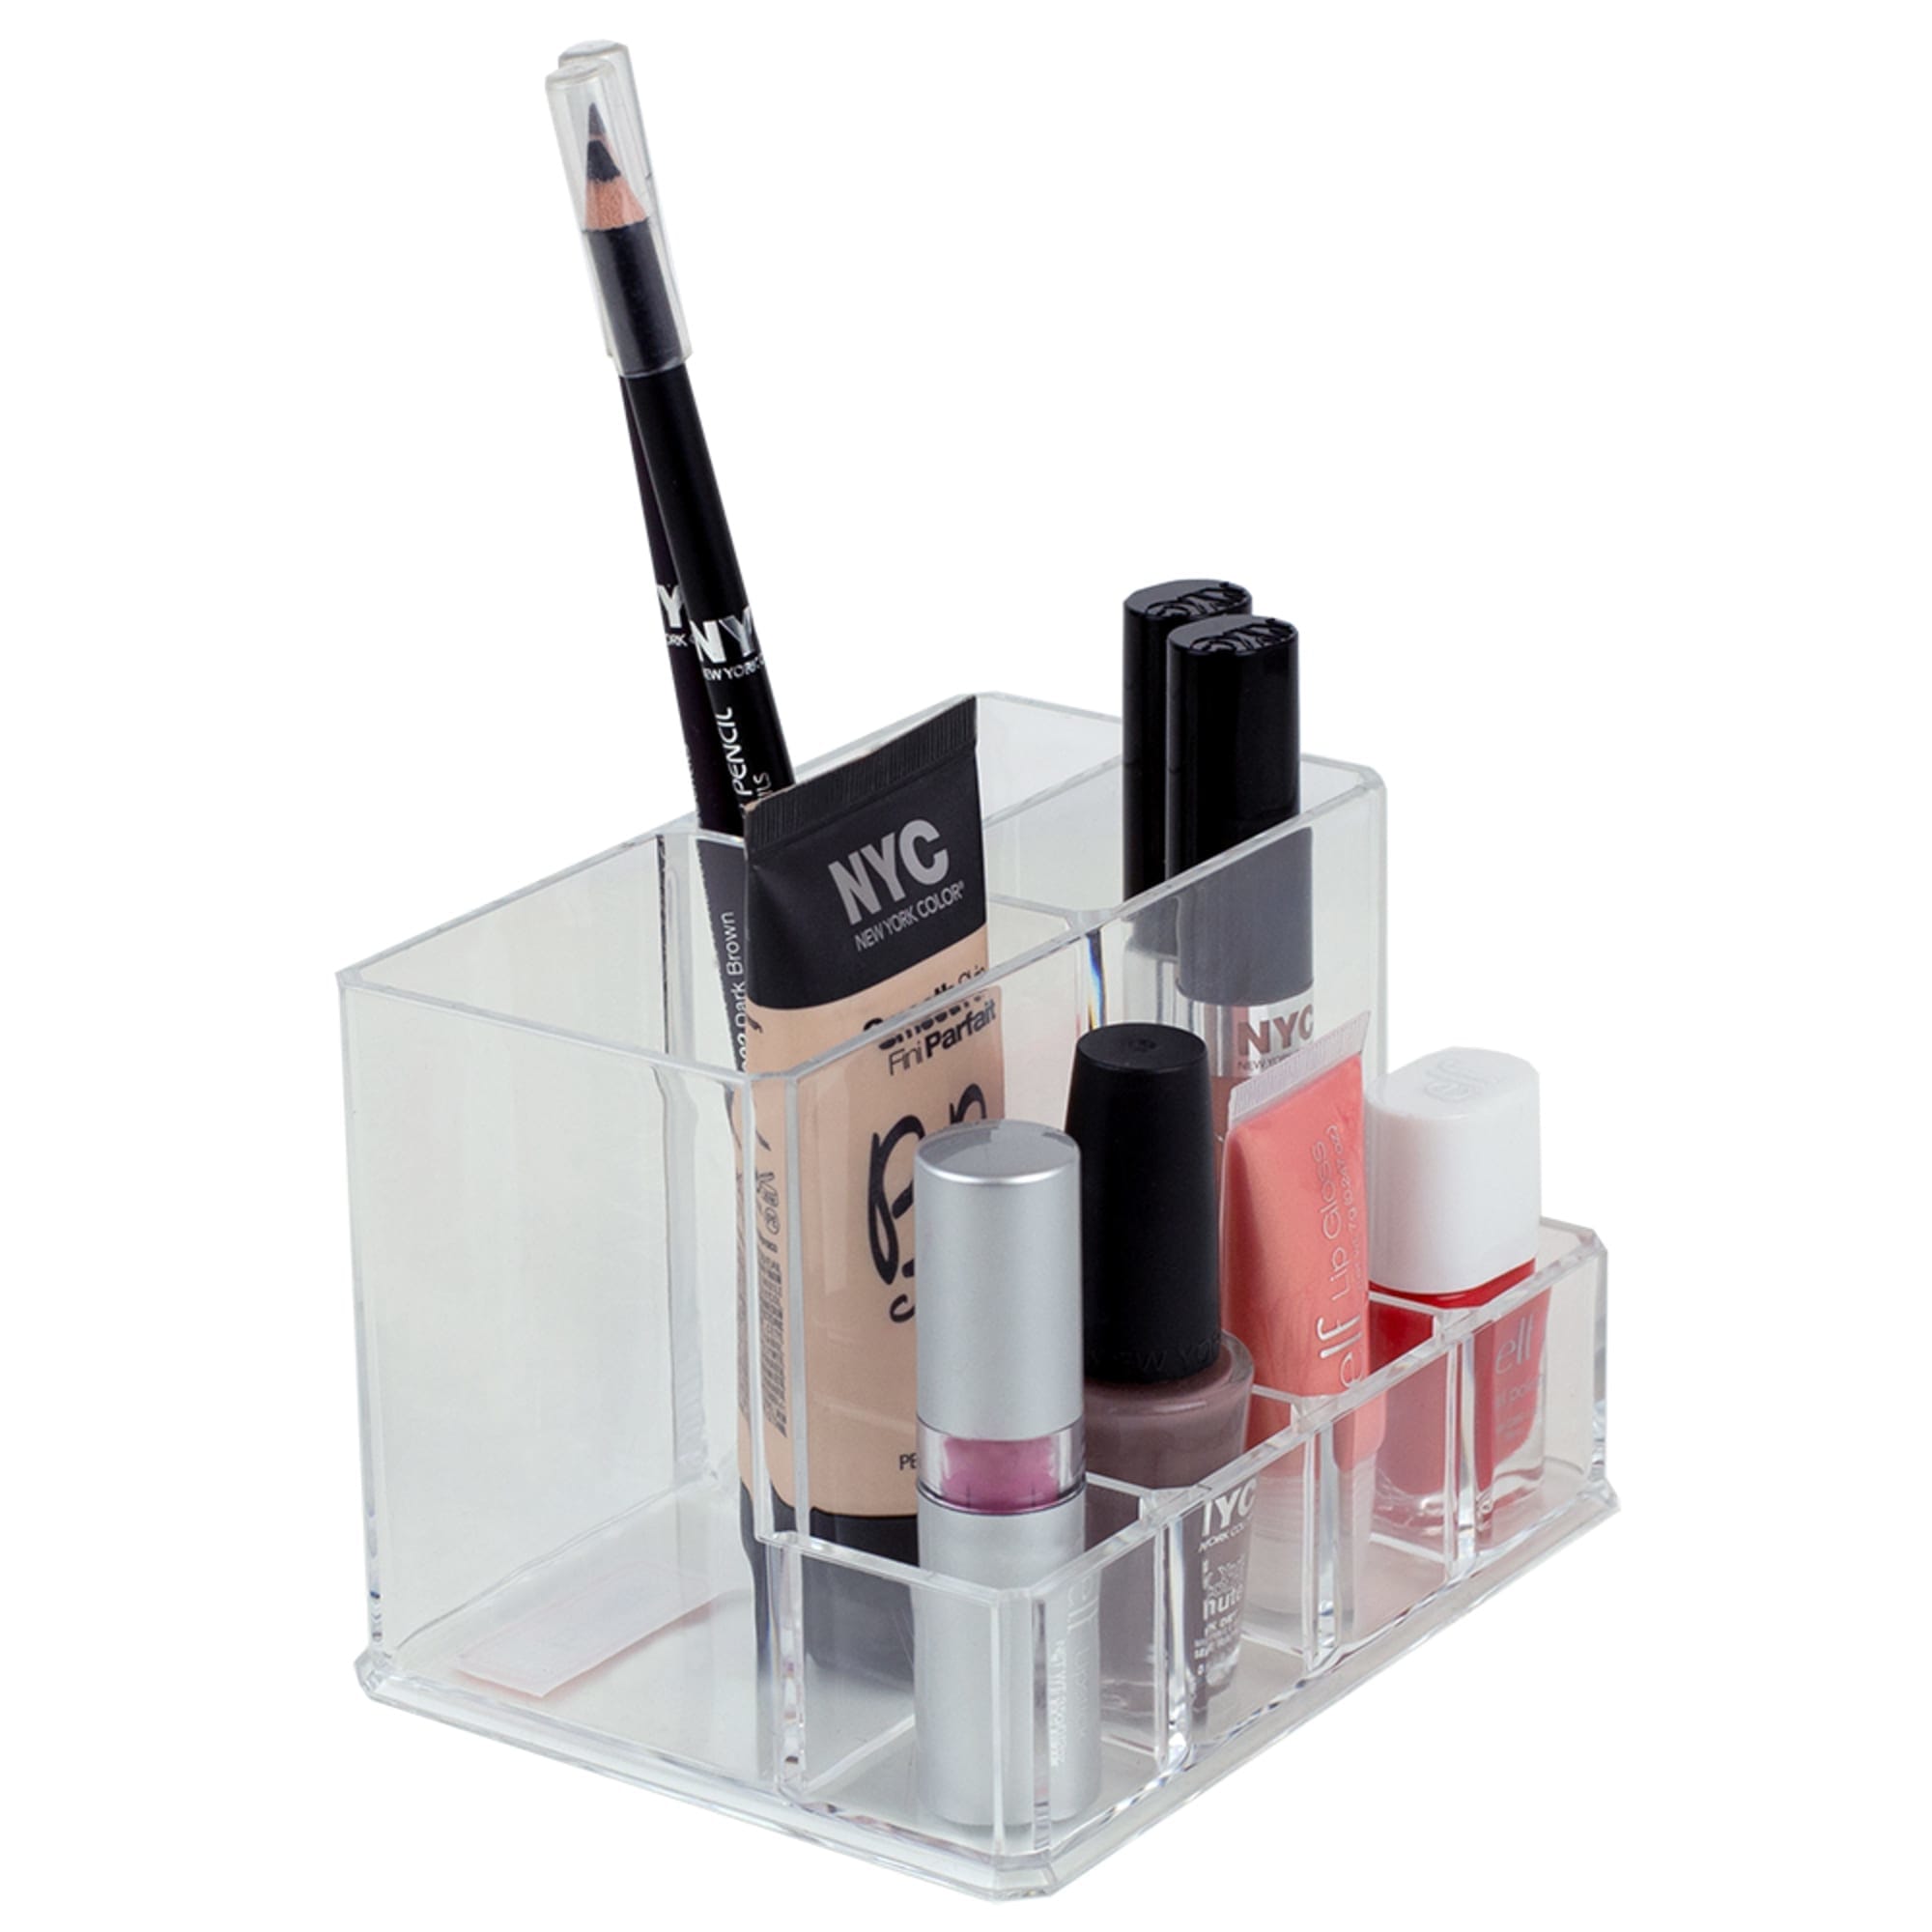 Home Basics Compact Shatter-Resistant Plastic Cosmetic Organizer, Clear $4.00 EACH, CASE PACK OF 12